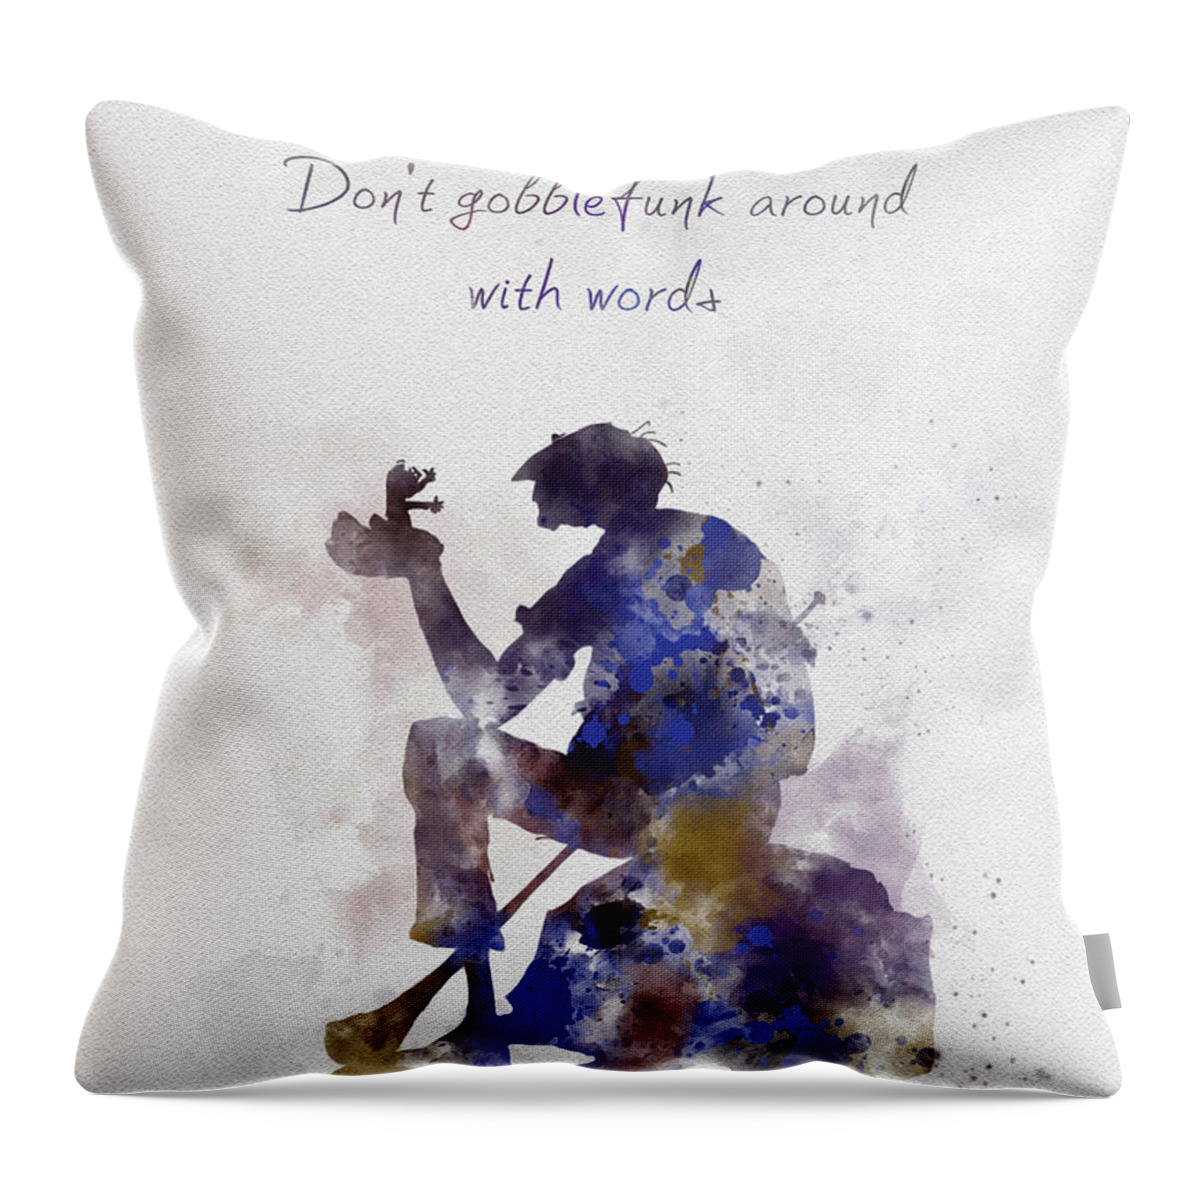 The Bfg Throw Pillow featuring the mixed media Don't gobblefunk around with words by My Inspiration